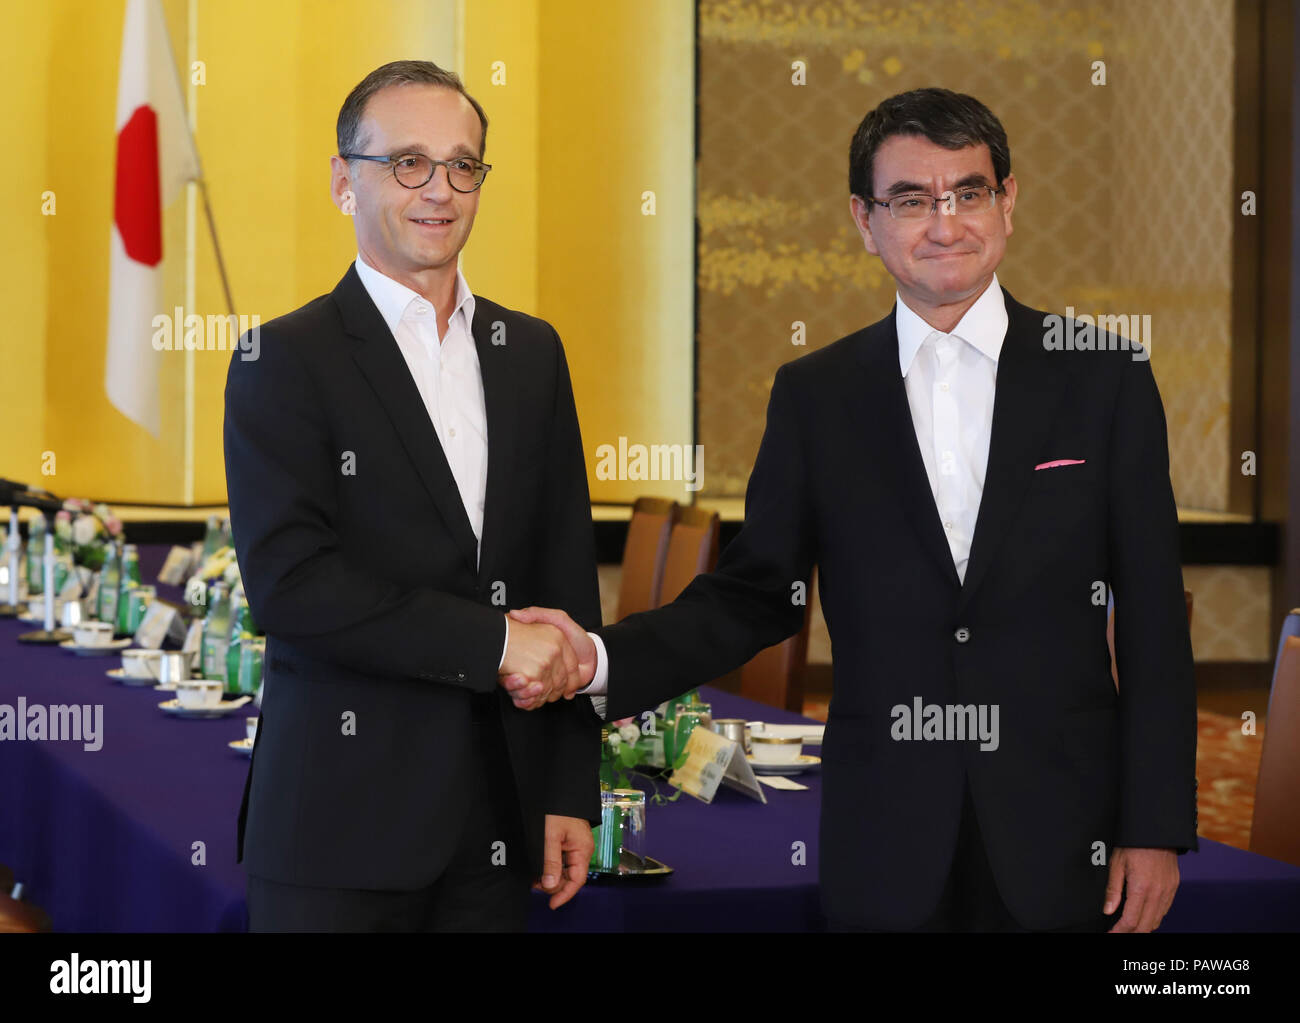 Tokyo, Japan. 25th July, 2018. Visiting German Foreign Minister Heiko Maas (L) shakes hands with his Japanese counterpart Taro Kono prior to their meeting at the Iikura guesthouse in Tokyo on Wednesday, July 25, 2018. Maas is now in Tokyo on the first leg of his Asian tour. Credit: Yoshio Tsunoda/AFLO/Alamy Live News Stock Photo